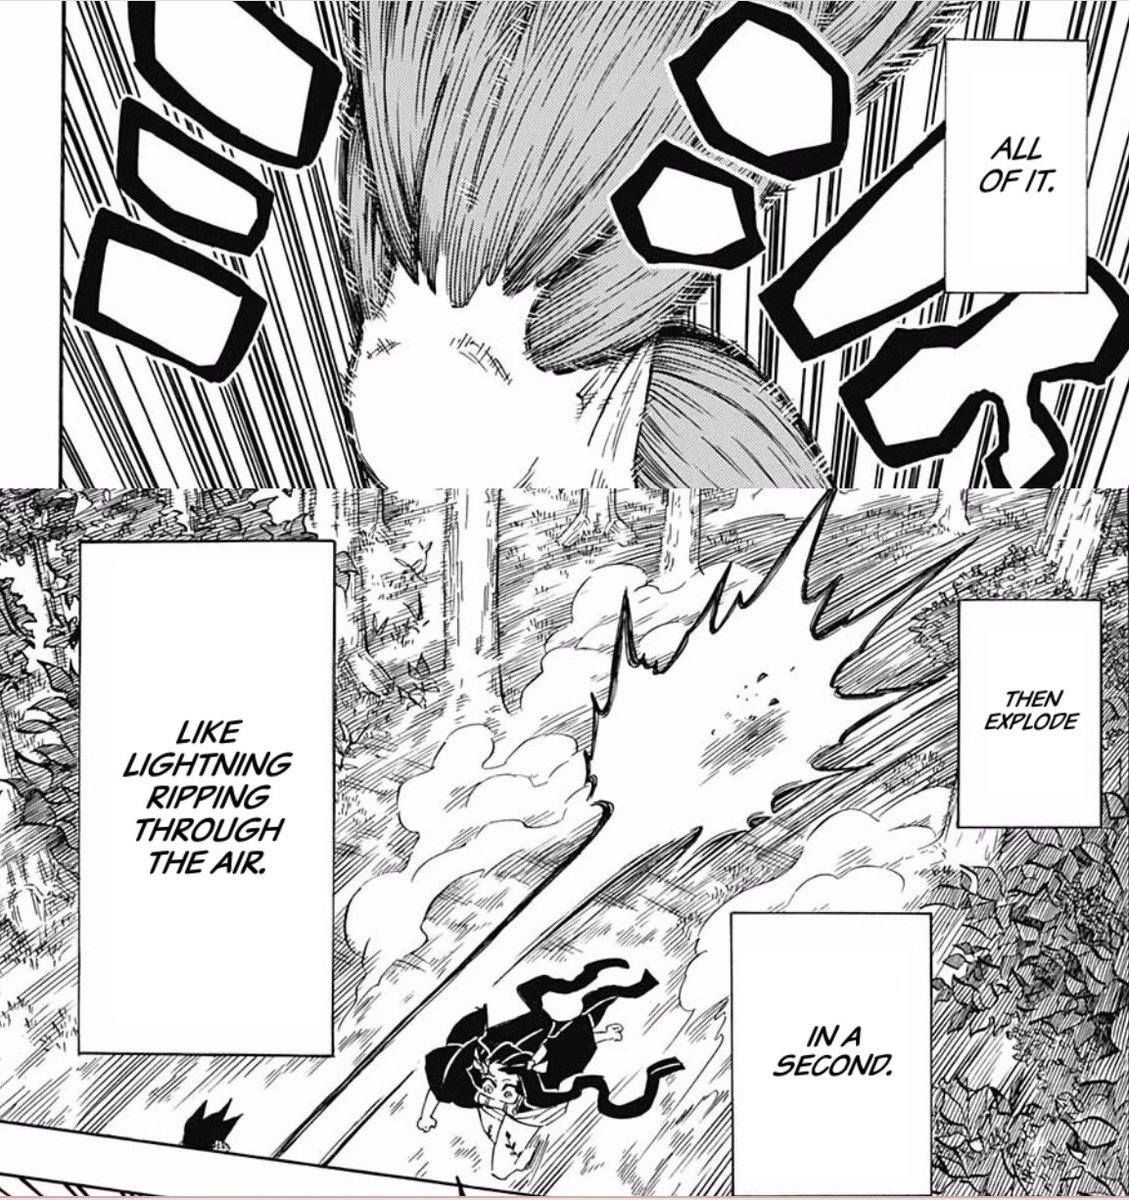 WE GET SOME ZENITSU NEXT EPISODEEE😭😭i miss him so much

i just know this scene is about to go hard as hell tho 🔥🔥⚡️